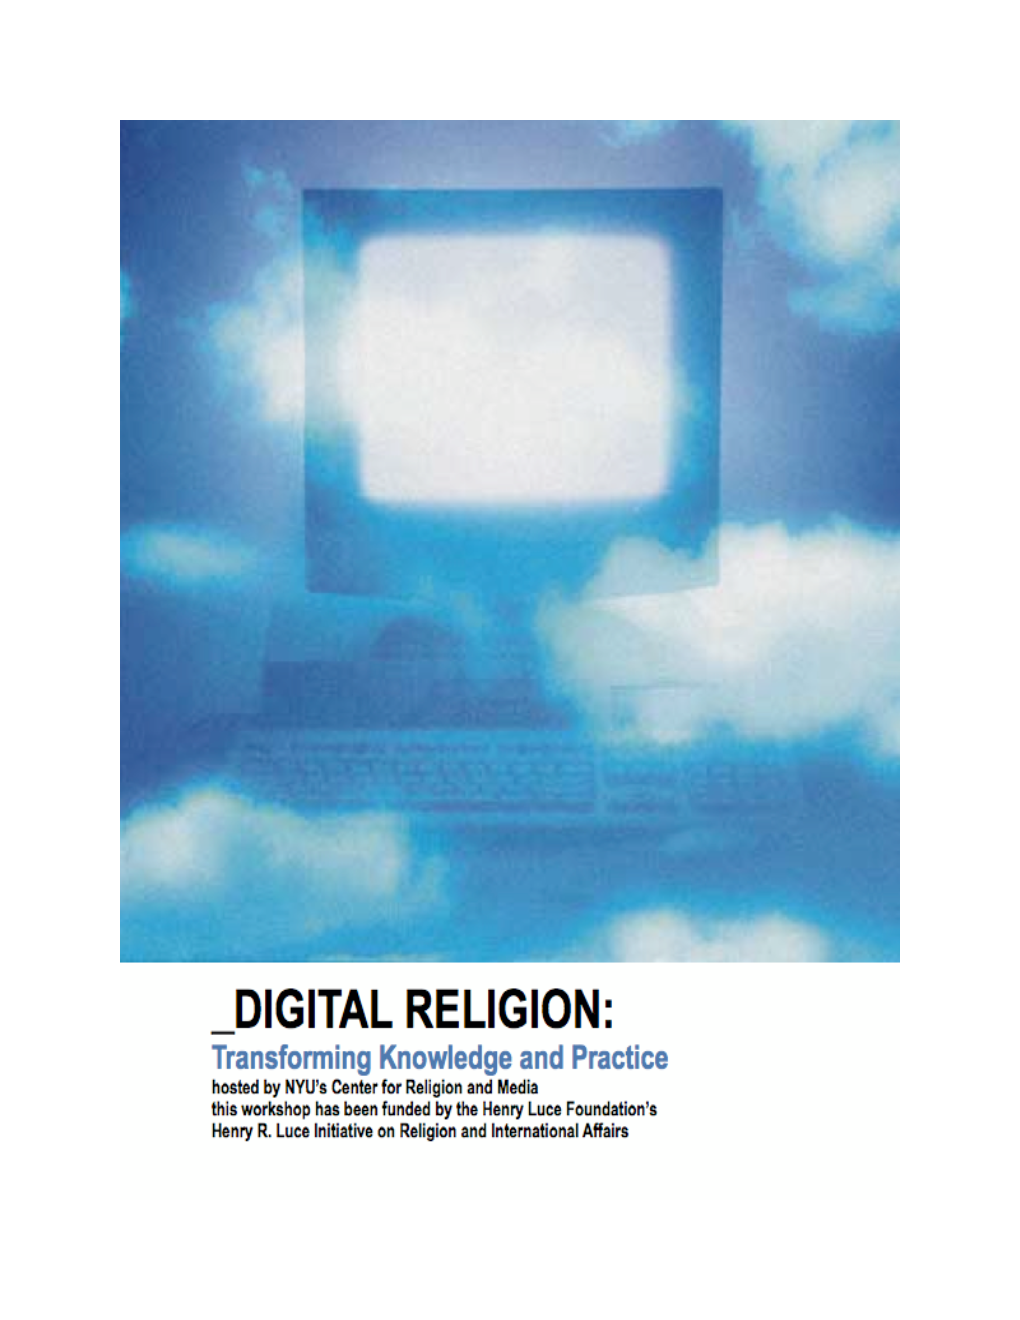 DIGITAL RELIGION: TRANSFORMING KNOWLEDGE and PRACTICE a Two-Day Workshop March 25-26, 2010